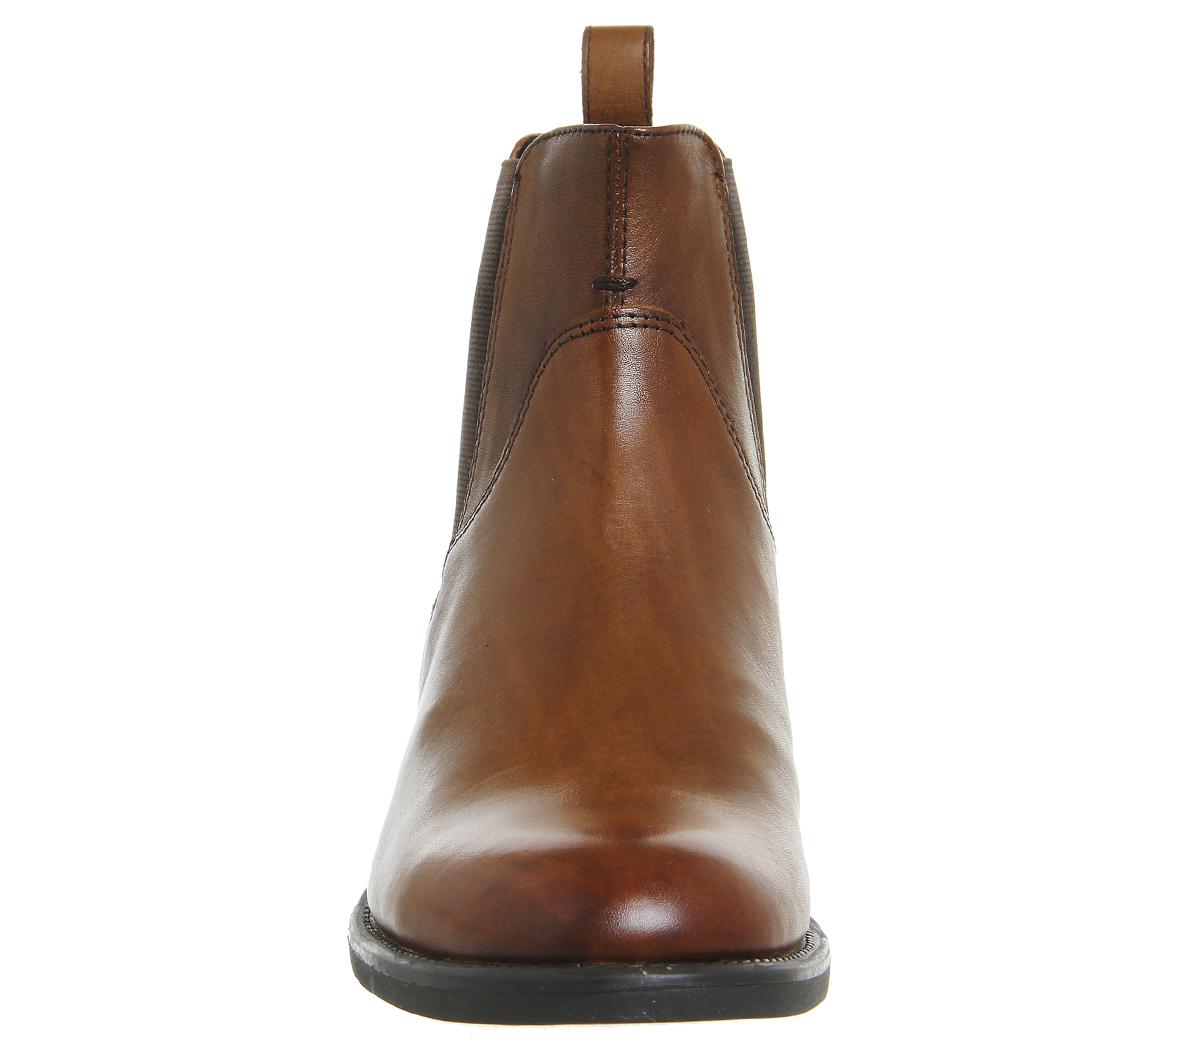 Vagabond Amina Chelsea Leather Boots in Cognac (Brown) - Lyst